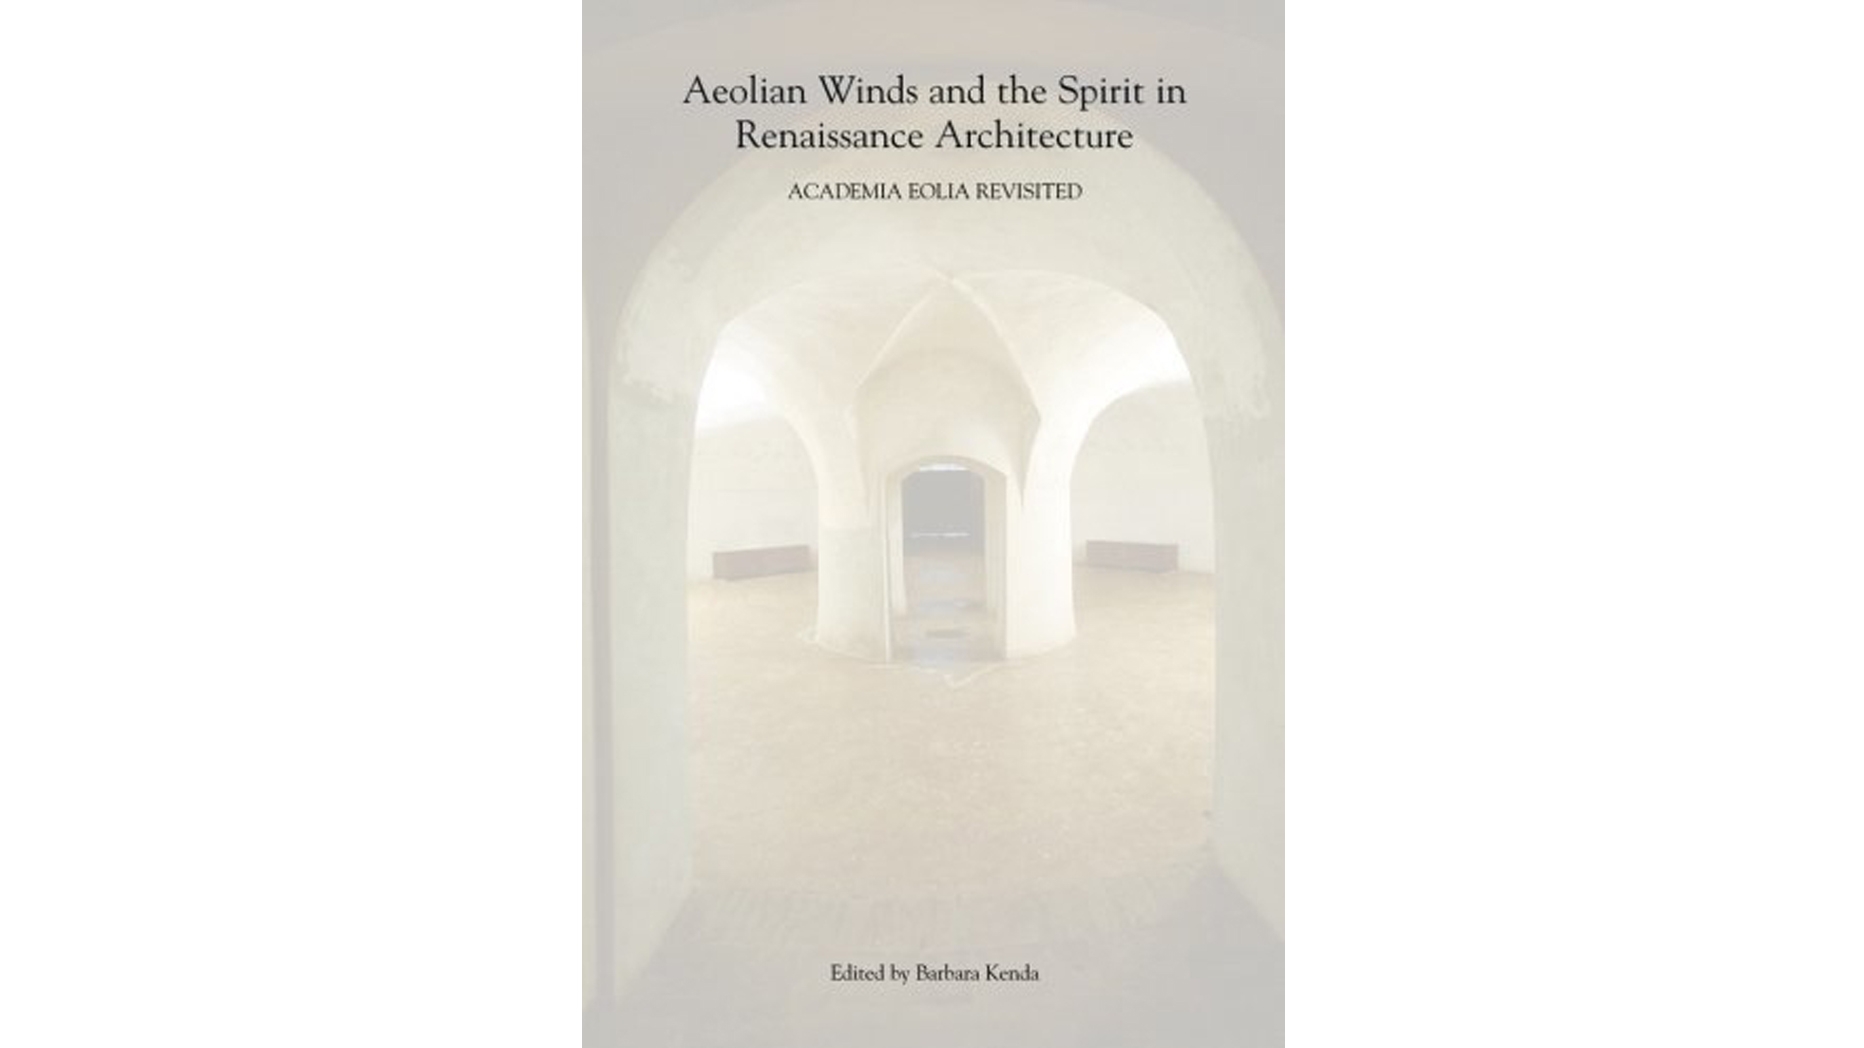 Aeolian Winds and the Spirit in Renaissance Architecture book cover